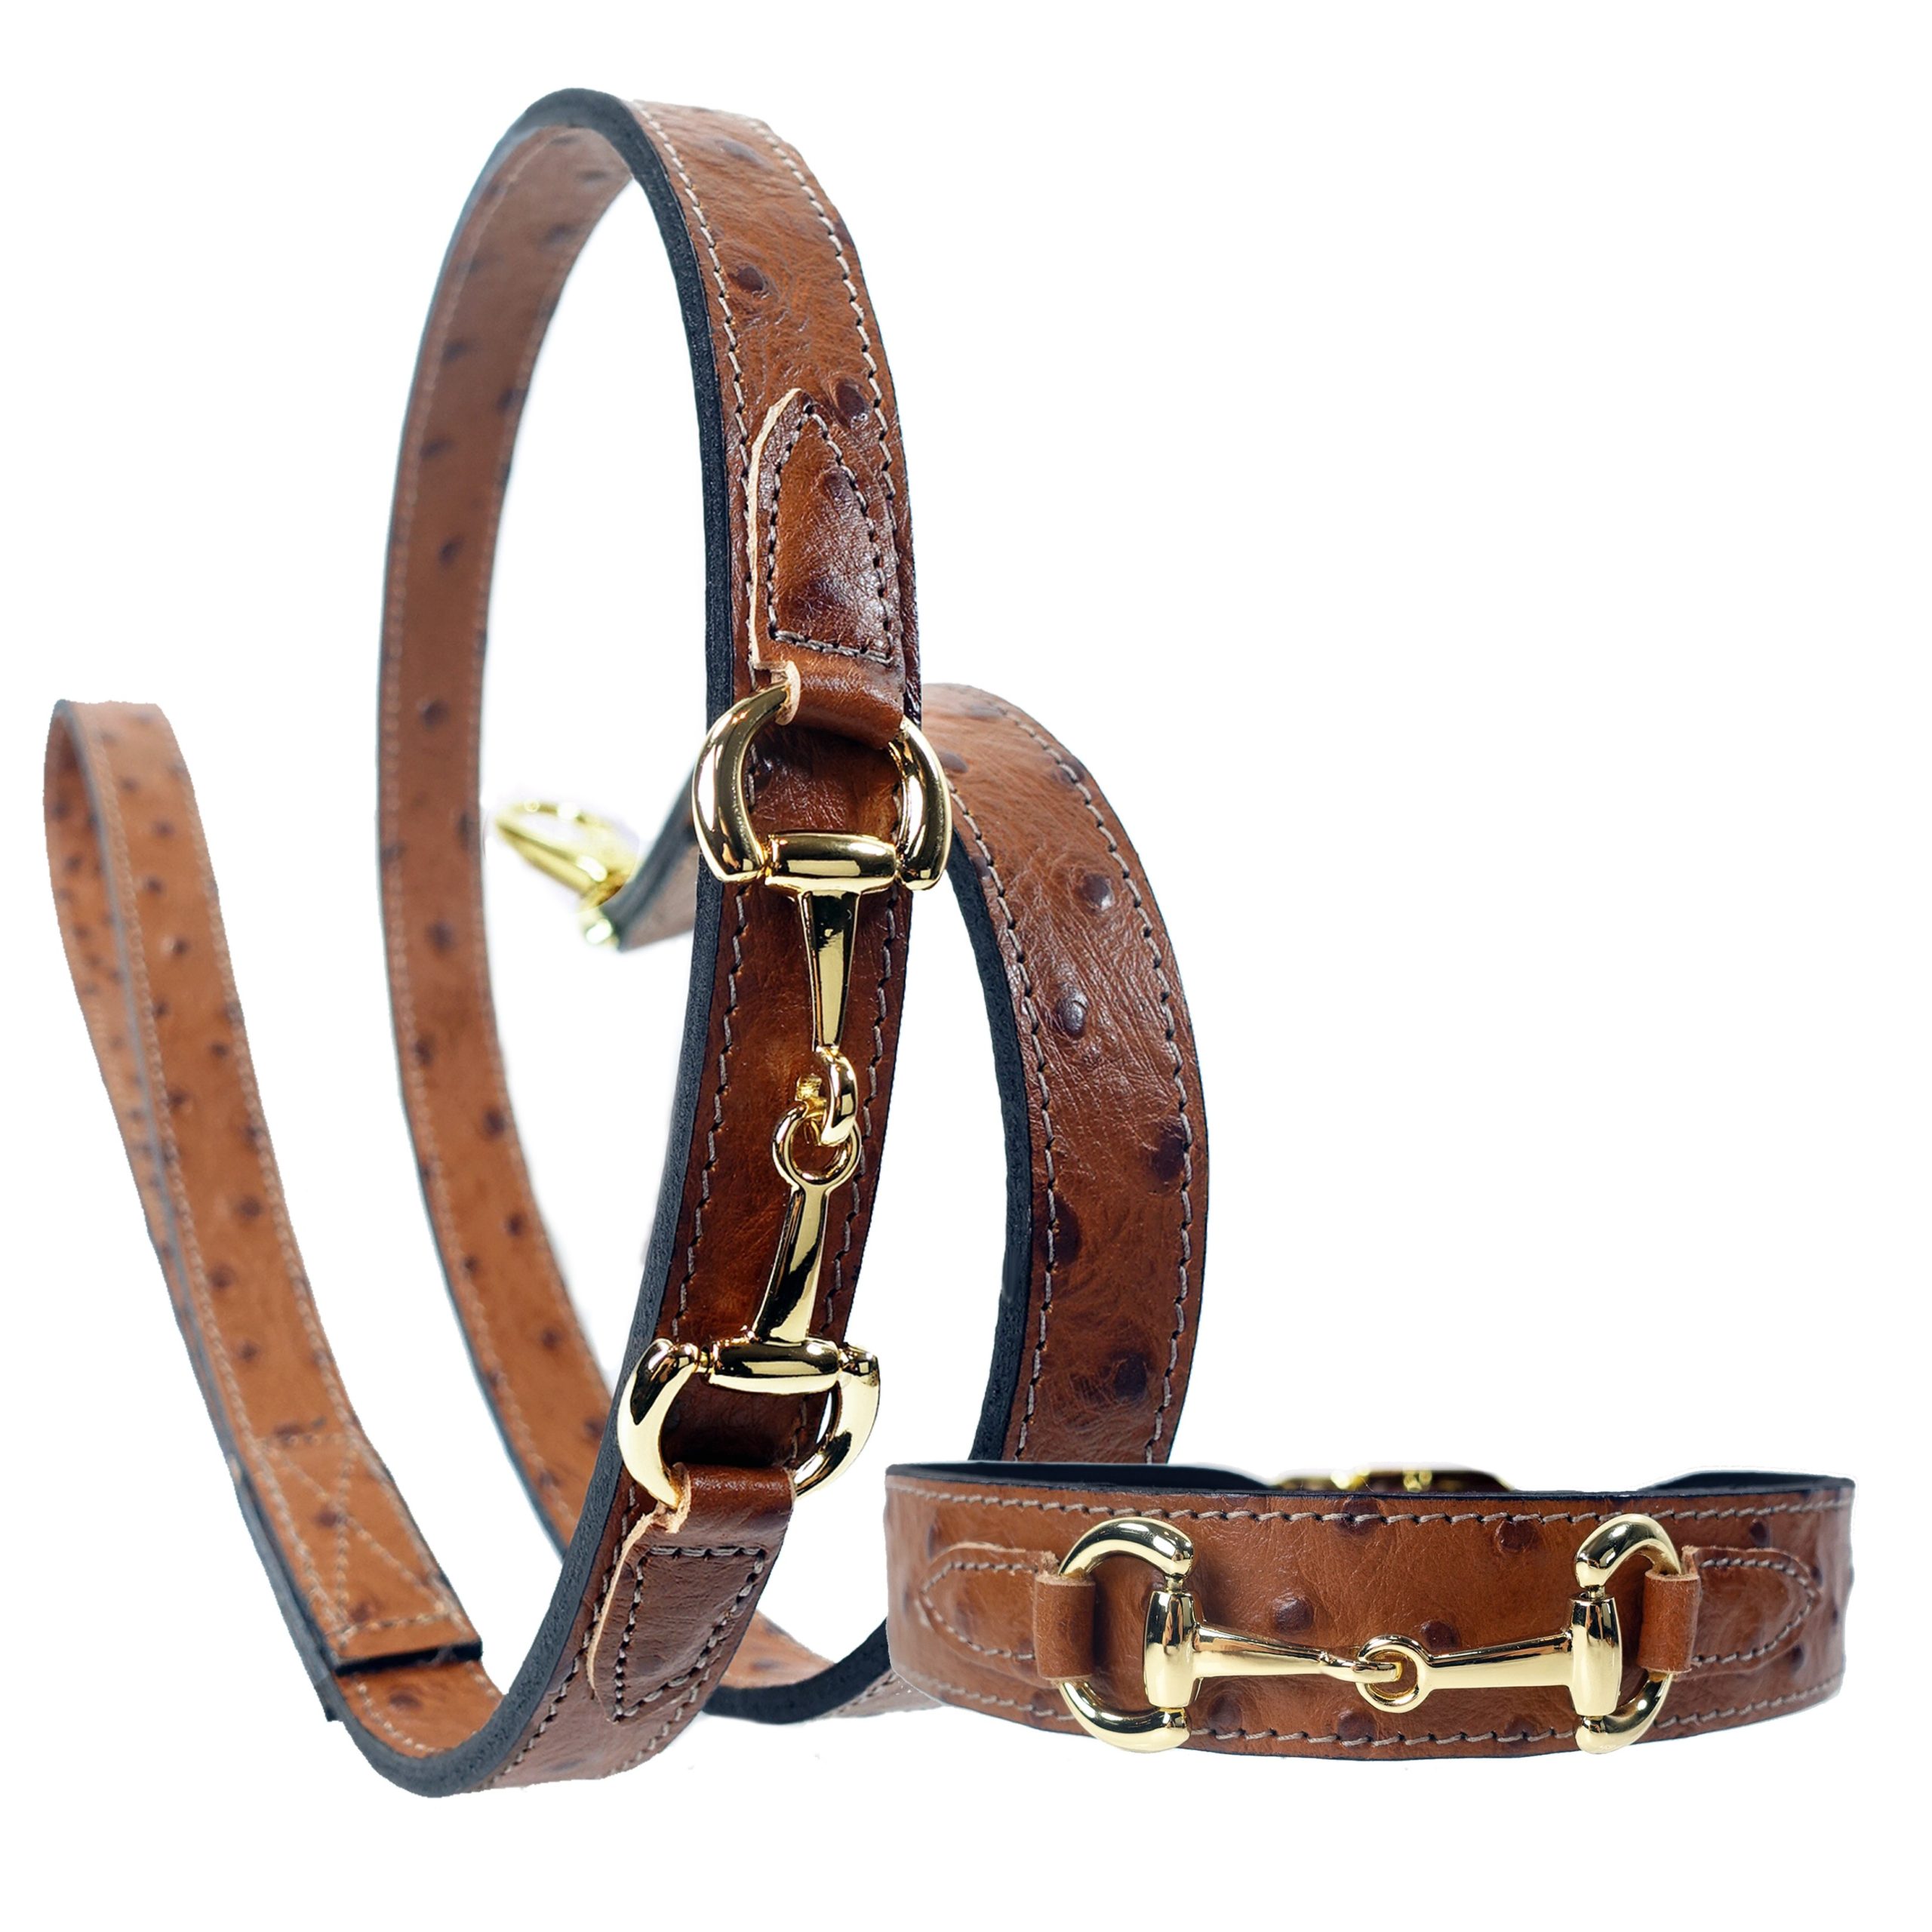 Gucci Style Dog Collar in Kelly Green - Collars Hartman and Rose Collection  Dog Collars Posh Puppy Boutique